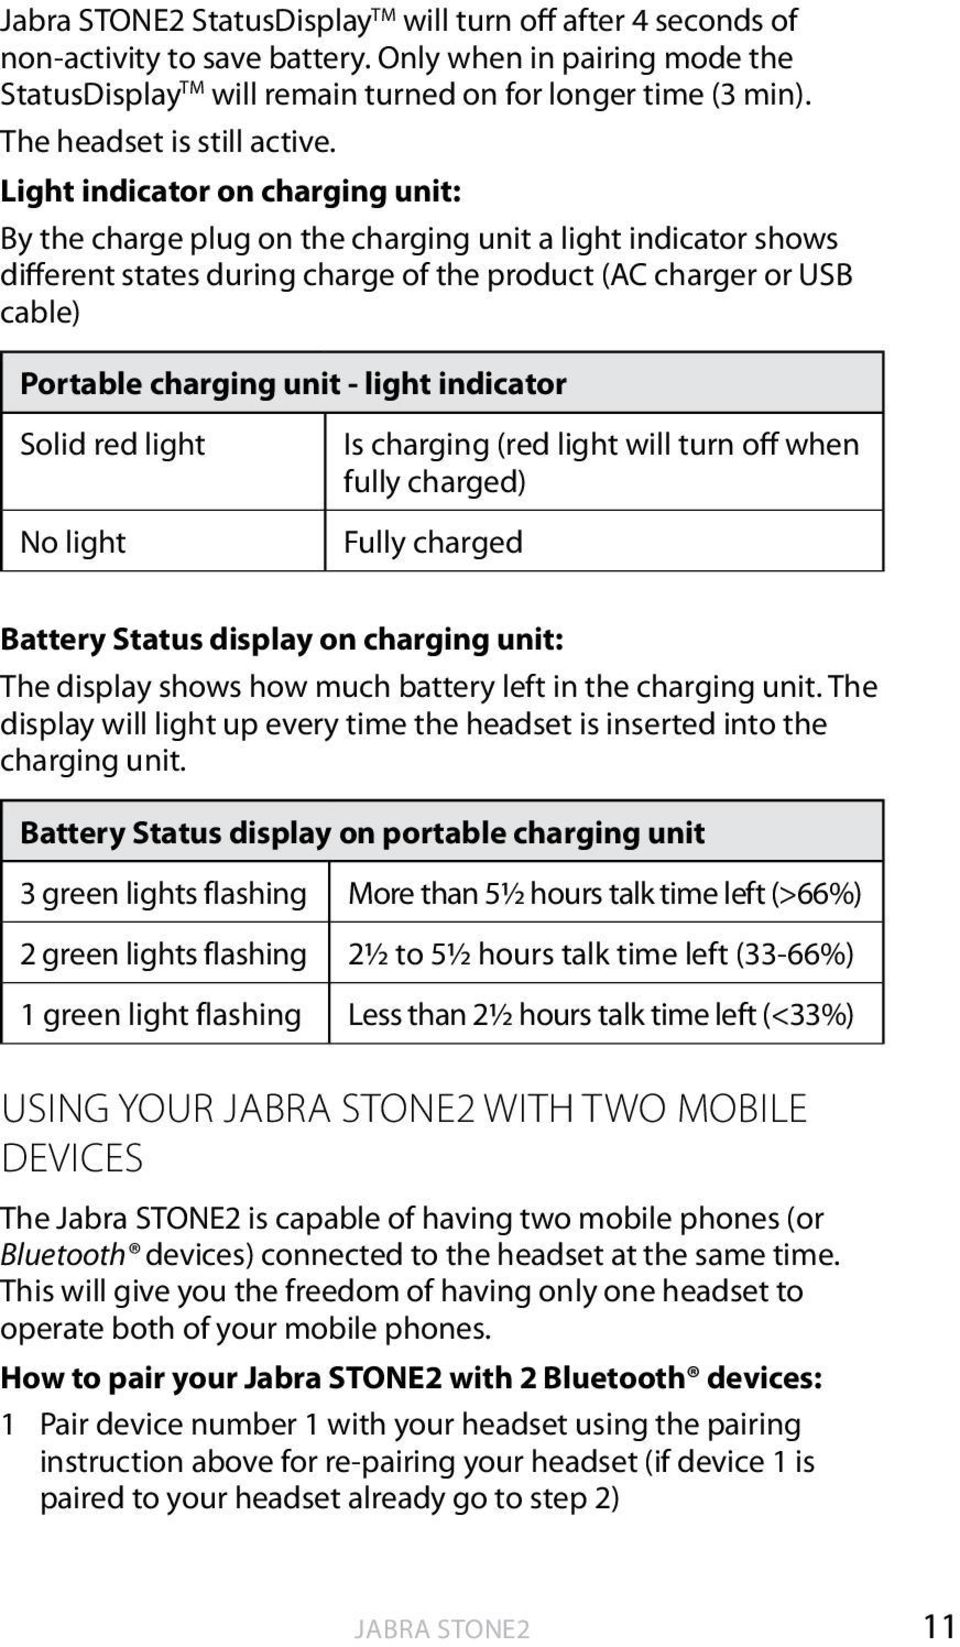 Light indicator on charging unit: By the charge plug on the charging unit a light indicator shows different states during charge of the product (AC charger or USB cable) english Portable charging